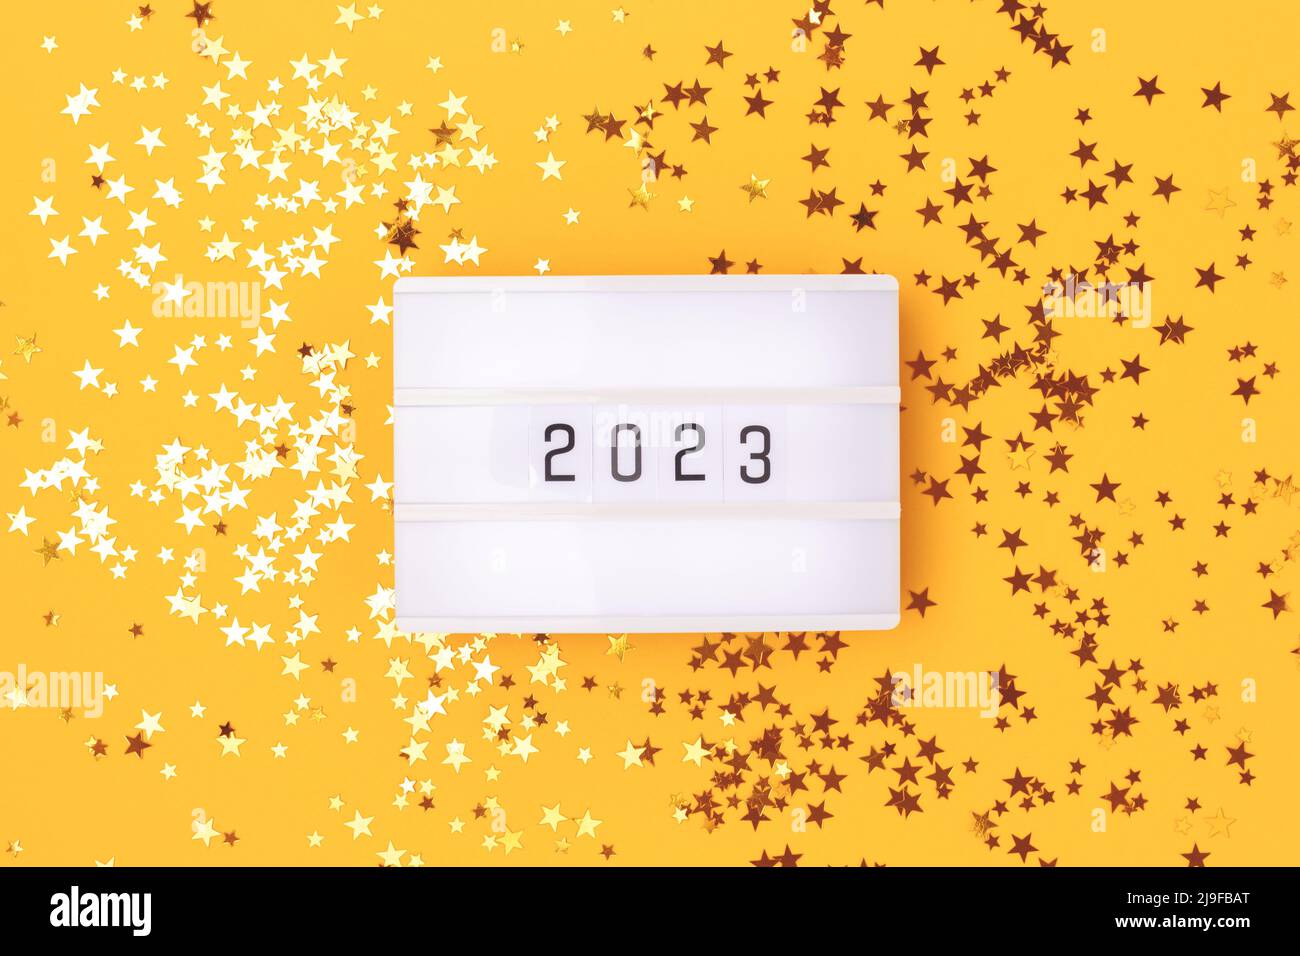 Lightbox with 2023 numbers on a yellow background with golden stars confetti. Stock Photo